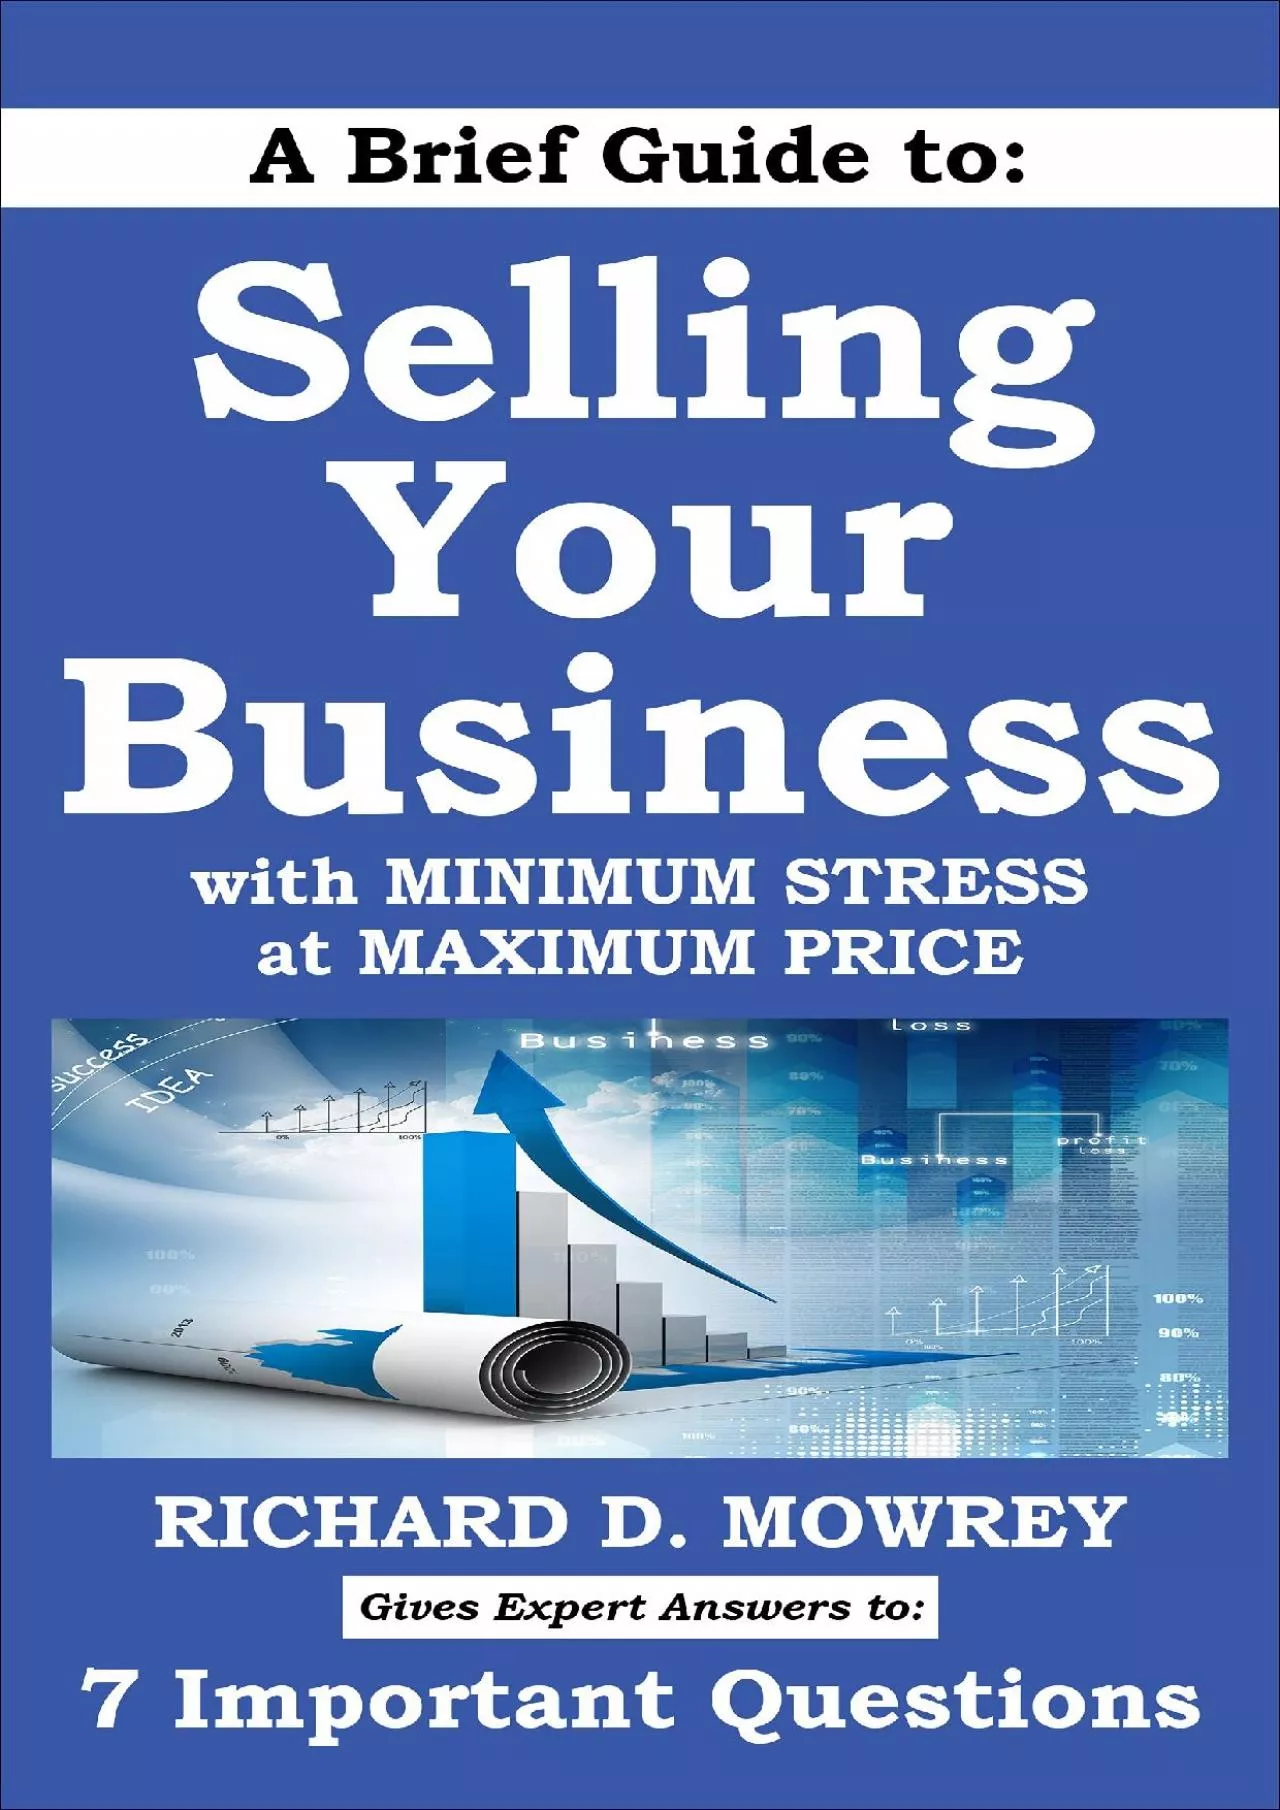 A Brief Guide to Selling Your Business with Minimum Stress at Maximum Price: Get Answers